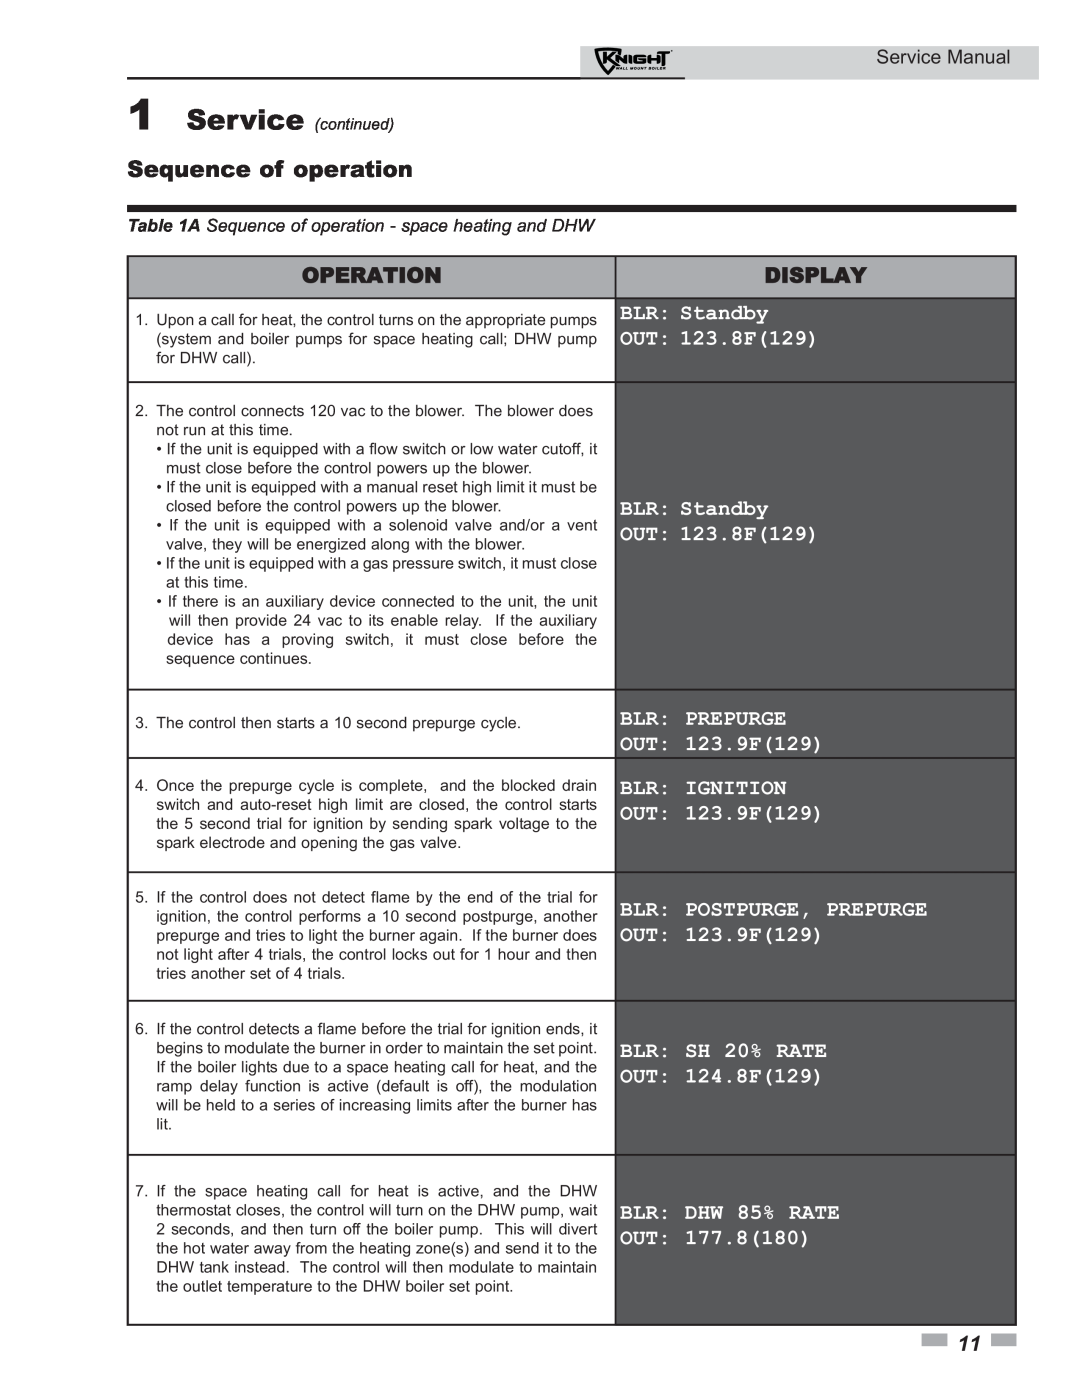 Lochinvar 50-210 service manual Sequence of operation, Operation, Display 